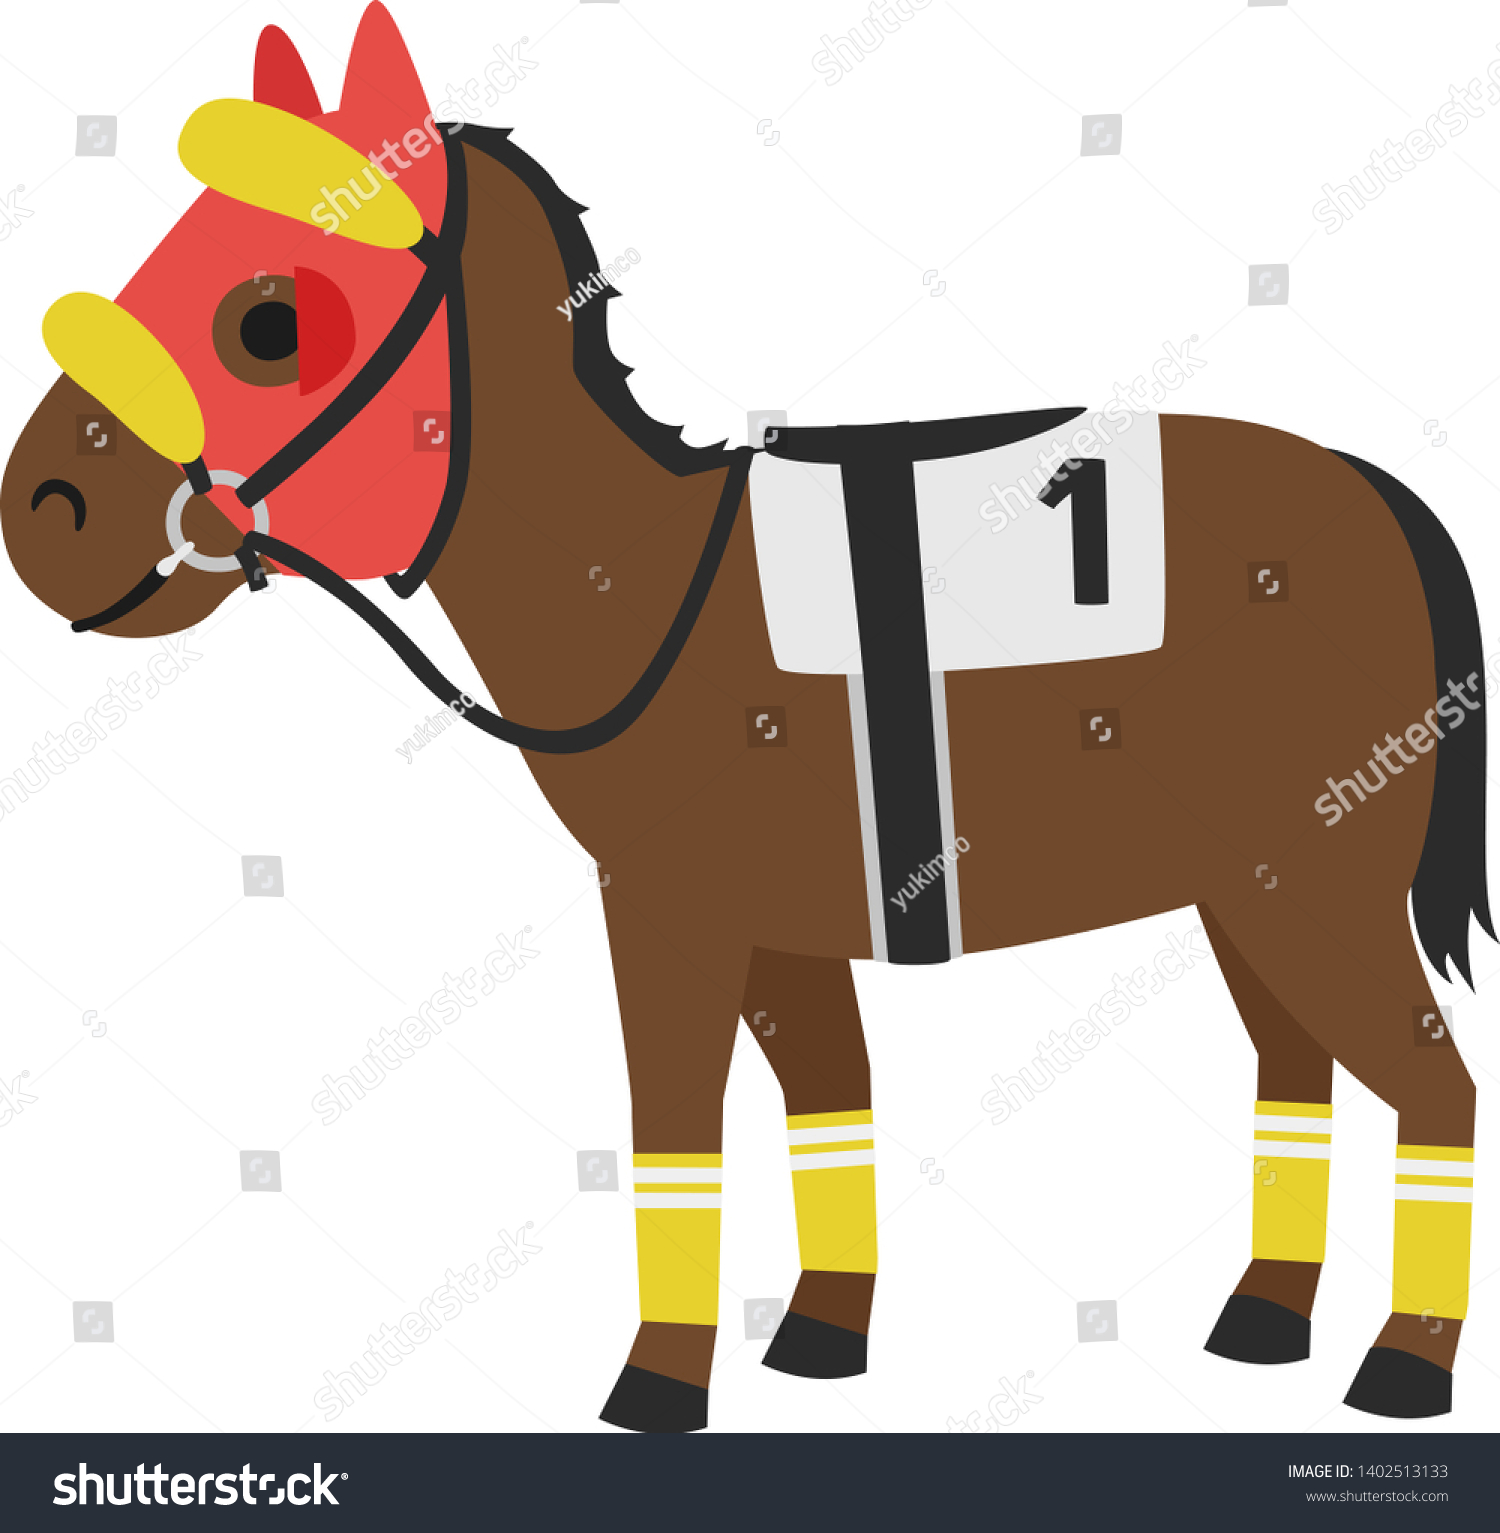 SVG of Horse racing illustration. This is a racehorse with a horse gear.
 svg